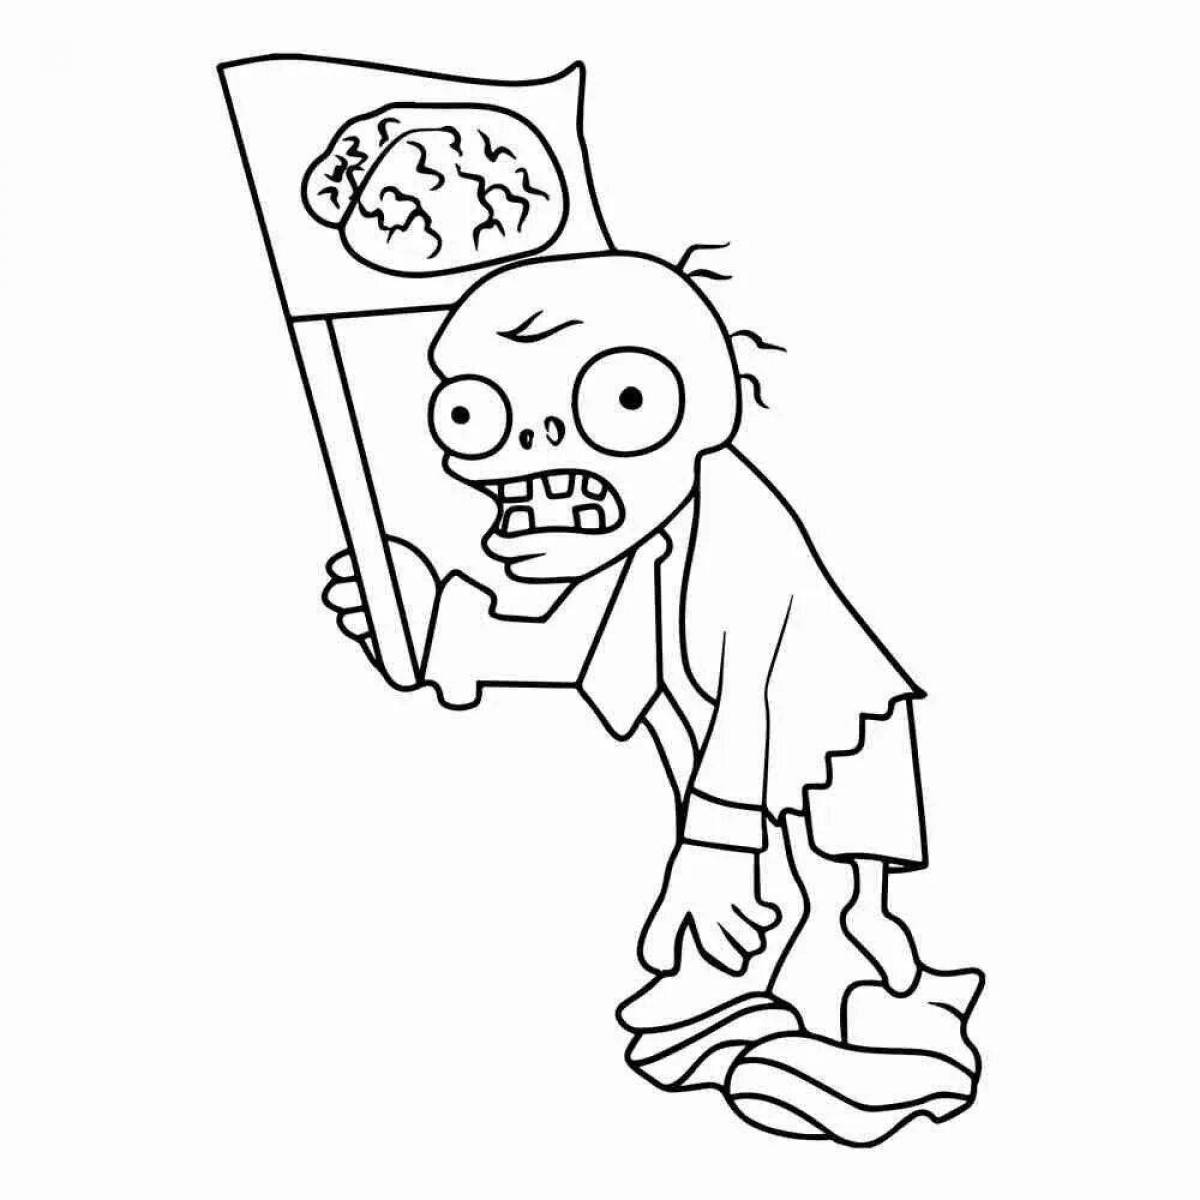 Grim zombie coloring book for kids